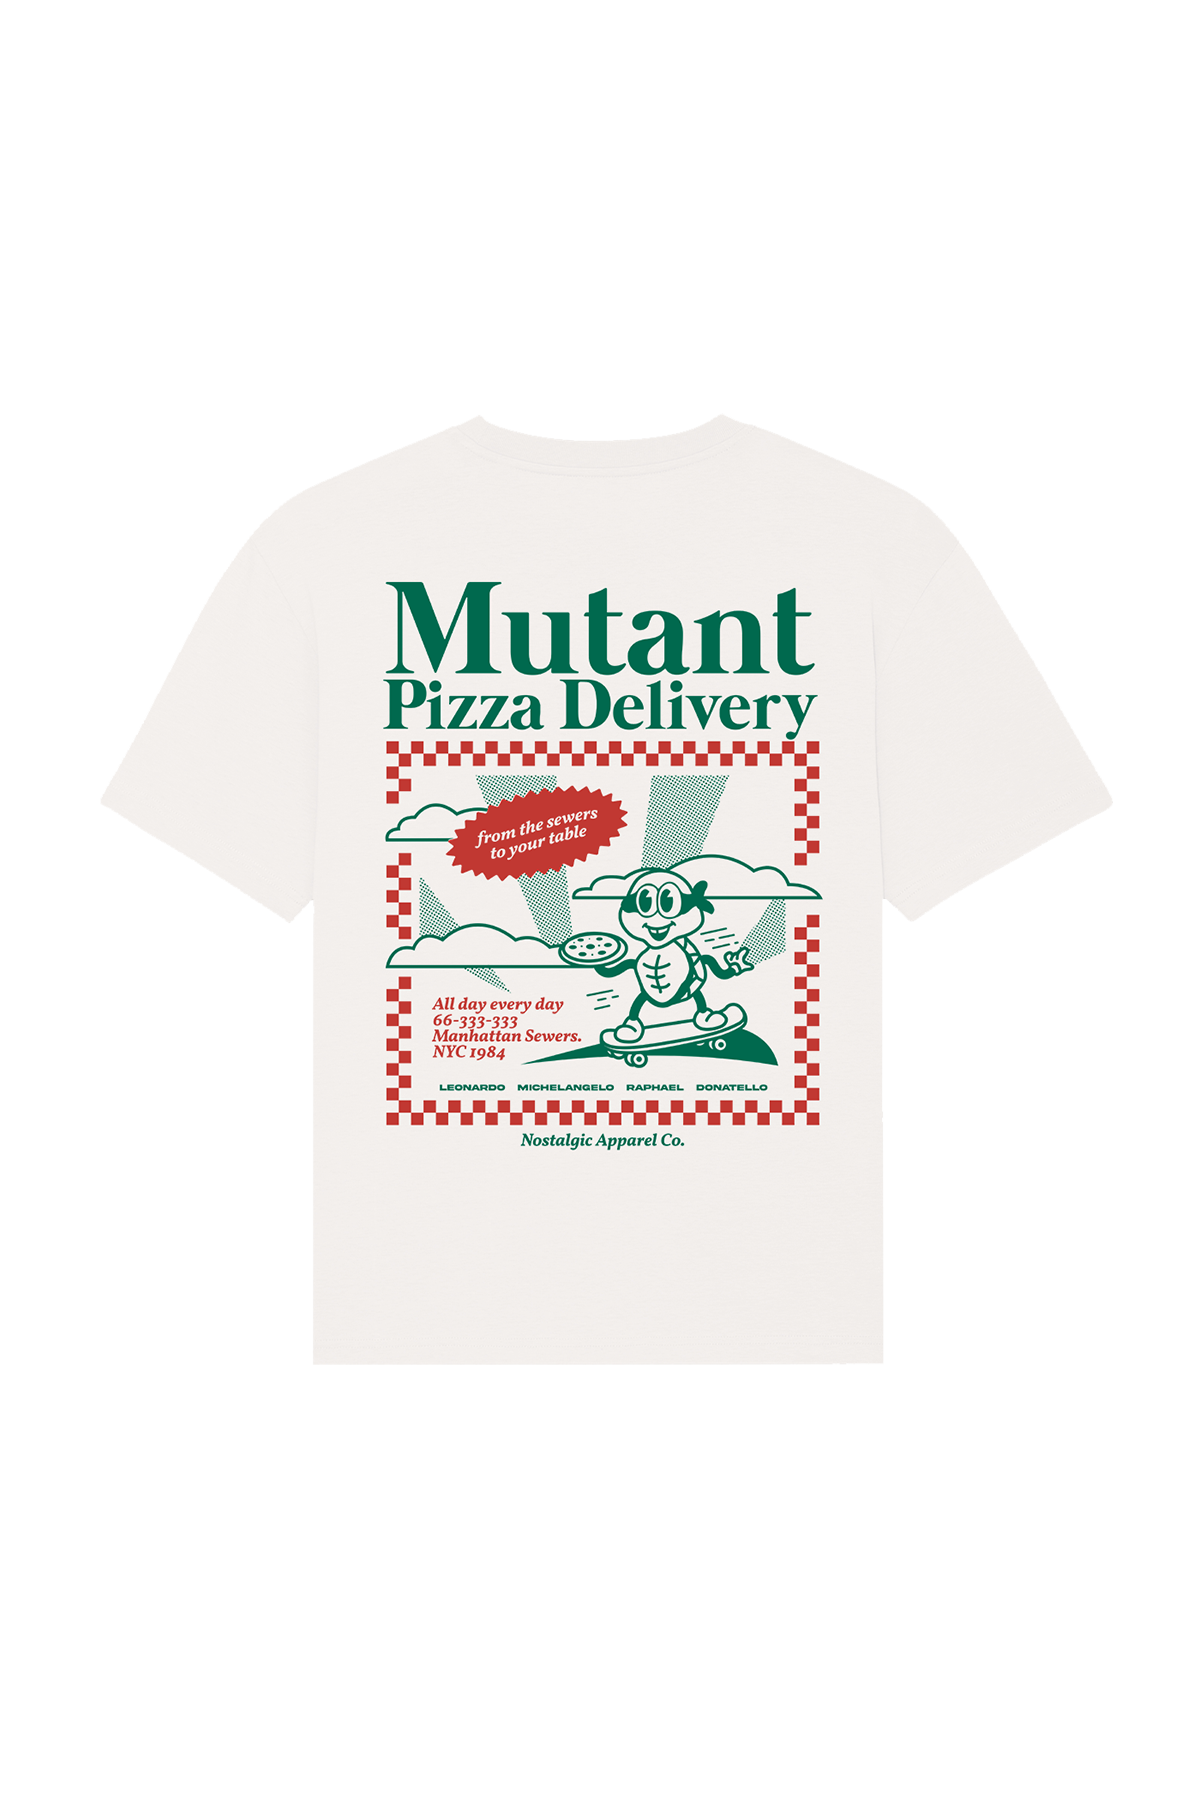 Mutant Pizza Delivery | OffWhite Tee